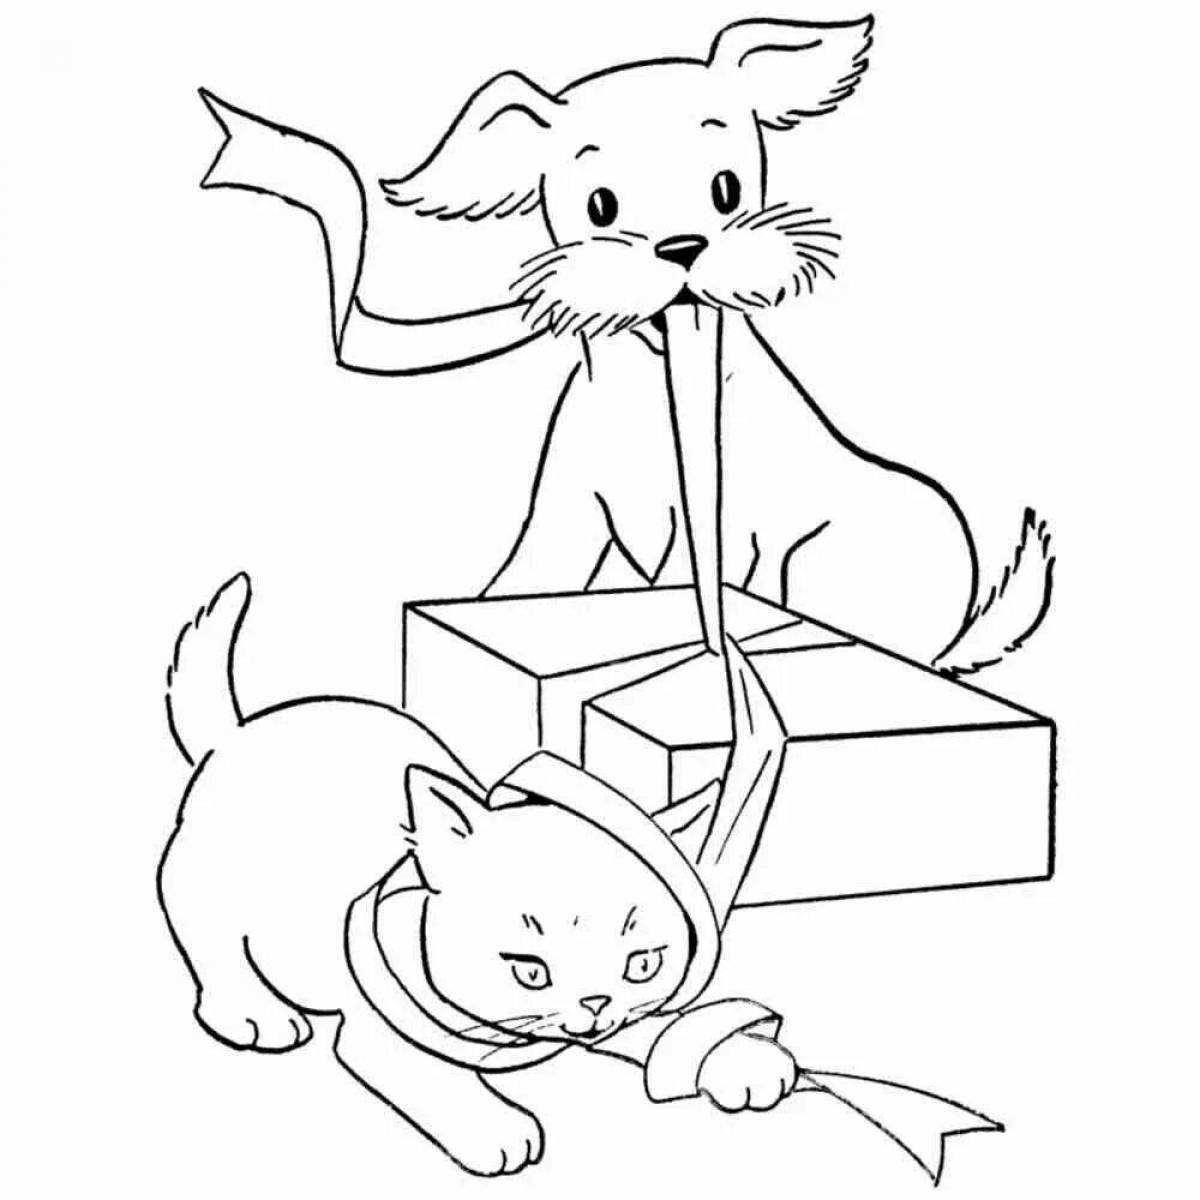 Cute cat and puppy coloring page